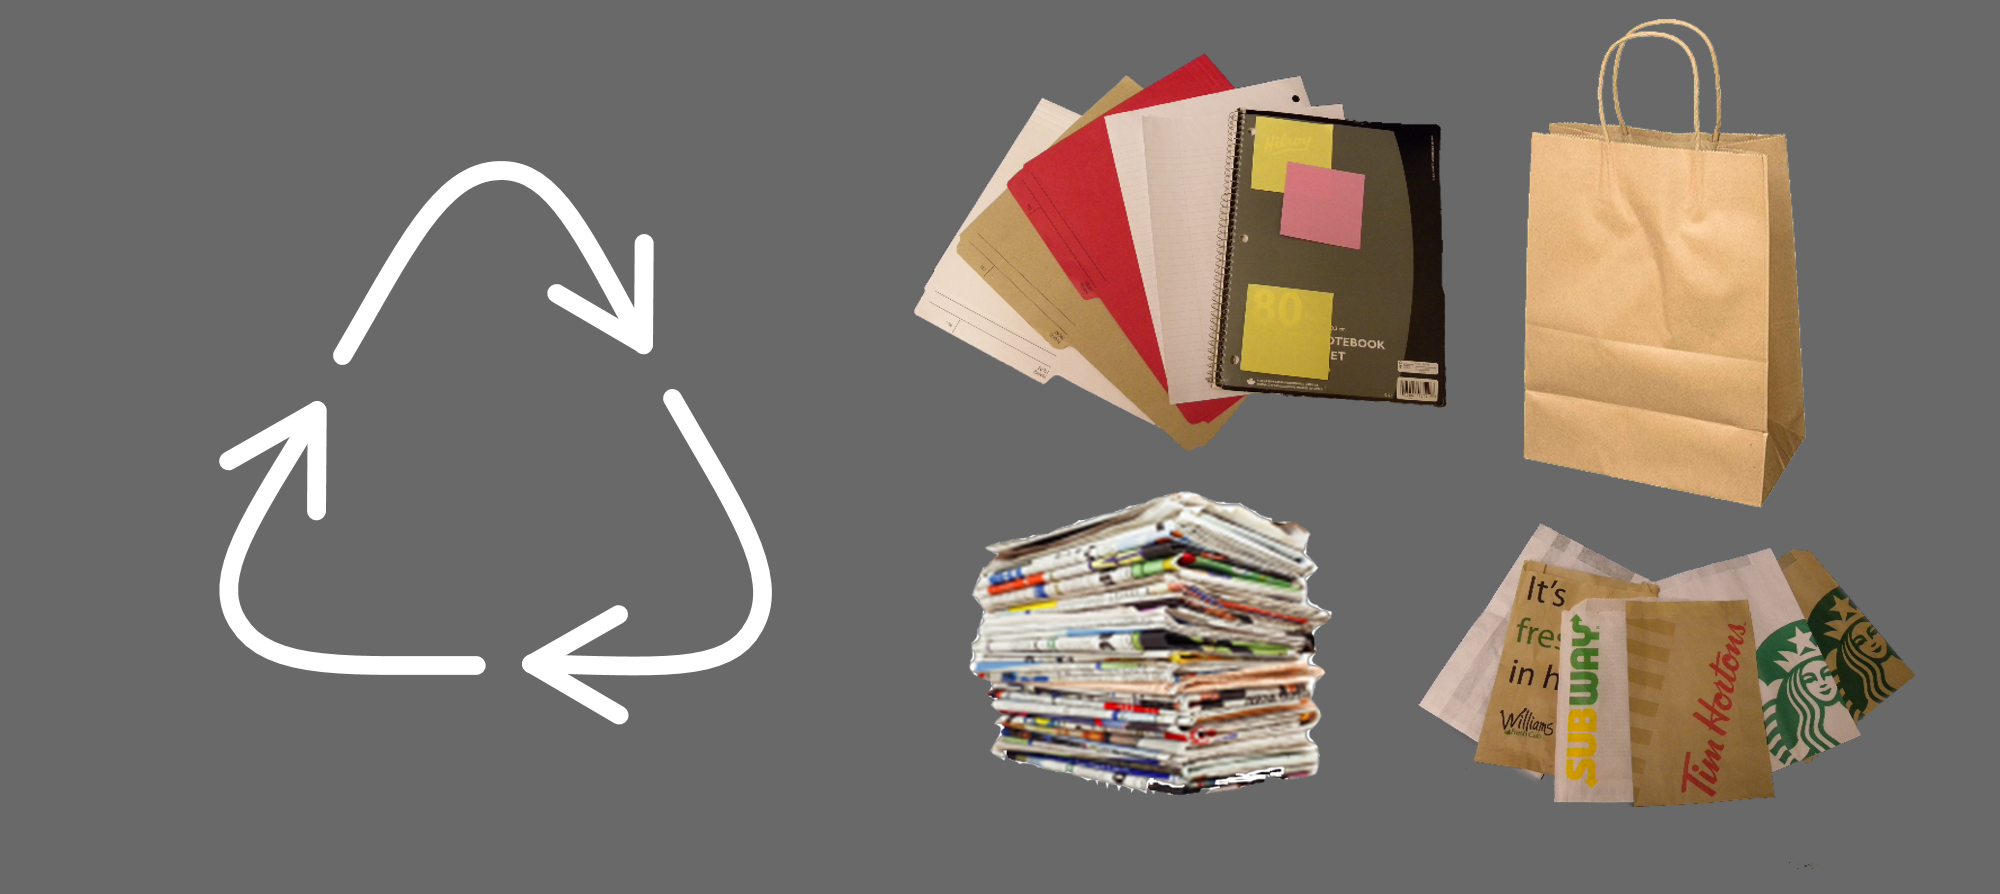 Paper recycling icon and images